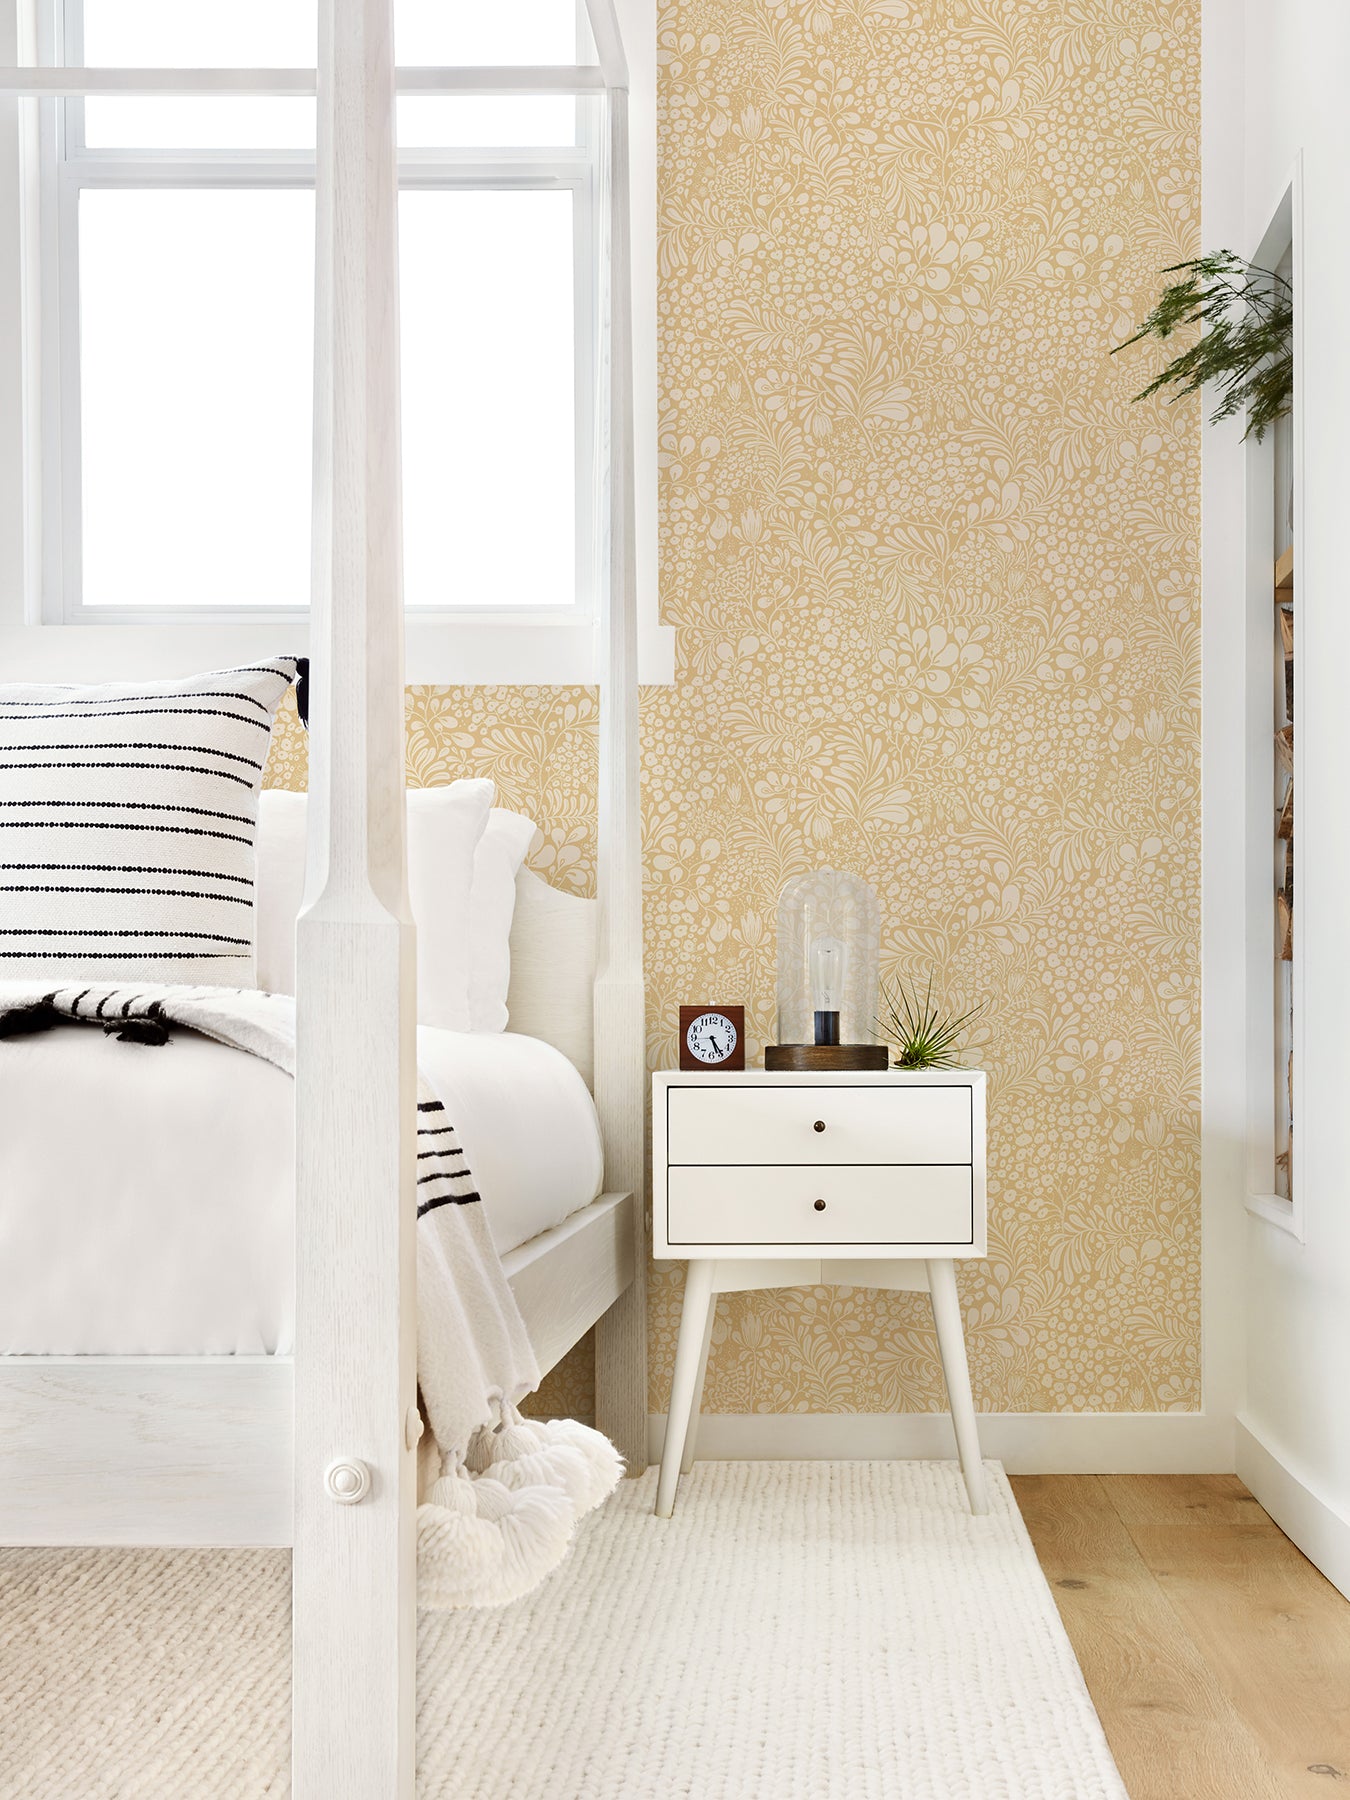 Looking for 2932-65128 Lina Siv Butter Botanical Yellow A-Street Prints Wallpaper